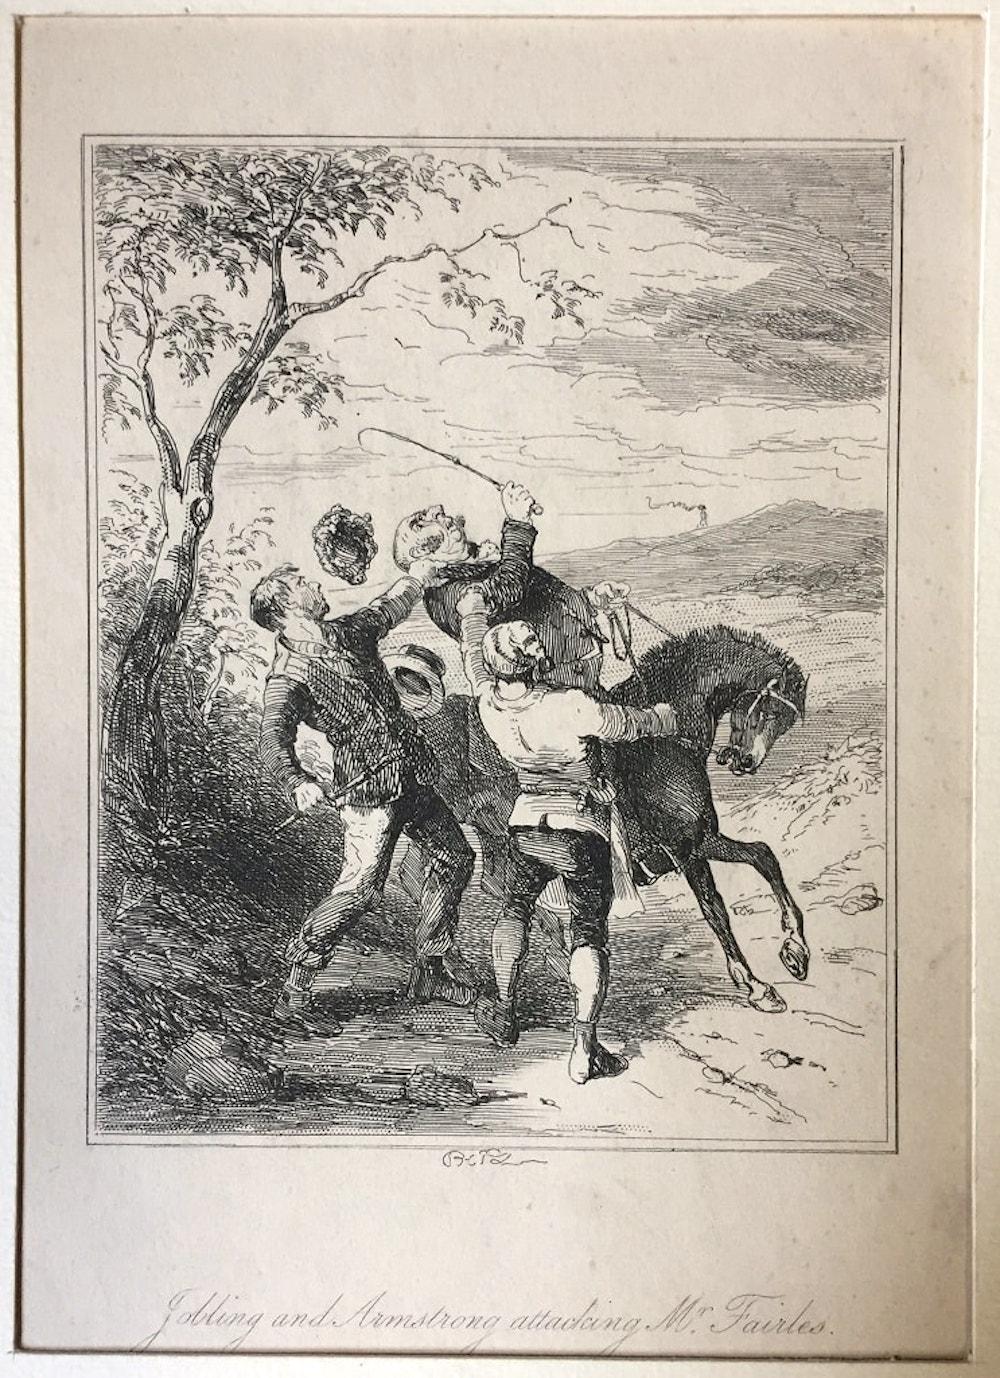 Browne Hablot Knight  Figurative Print - Folling and Armstrong attacking Mr. Fairles- Etching by PHIZ - Mid 19th Century 